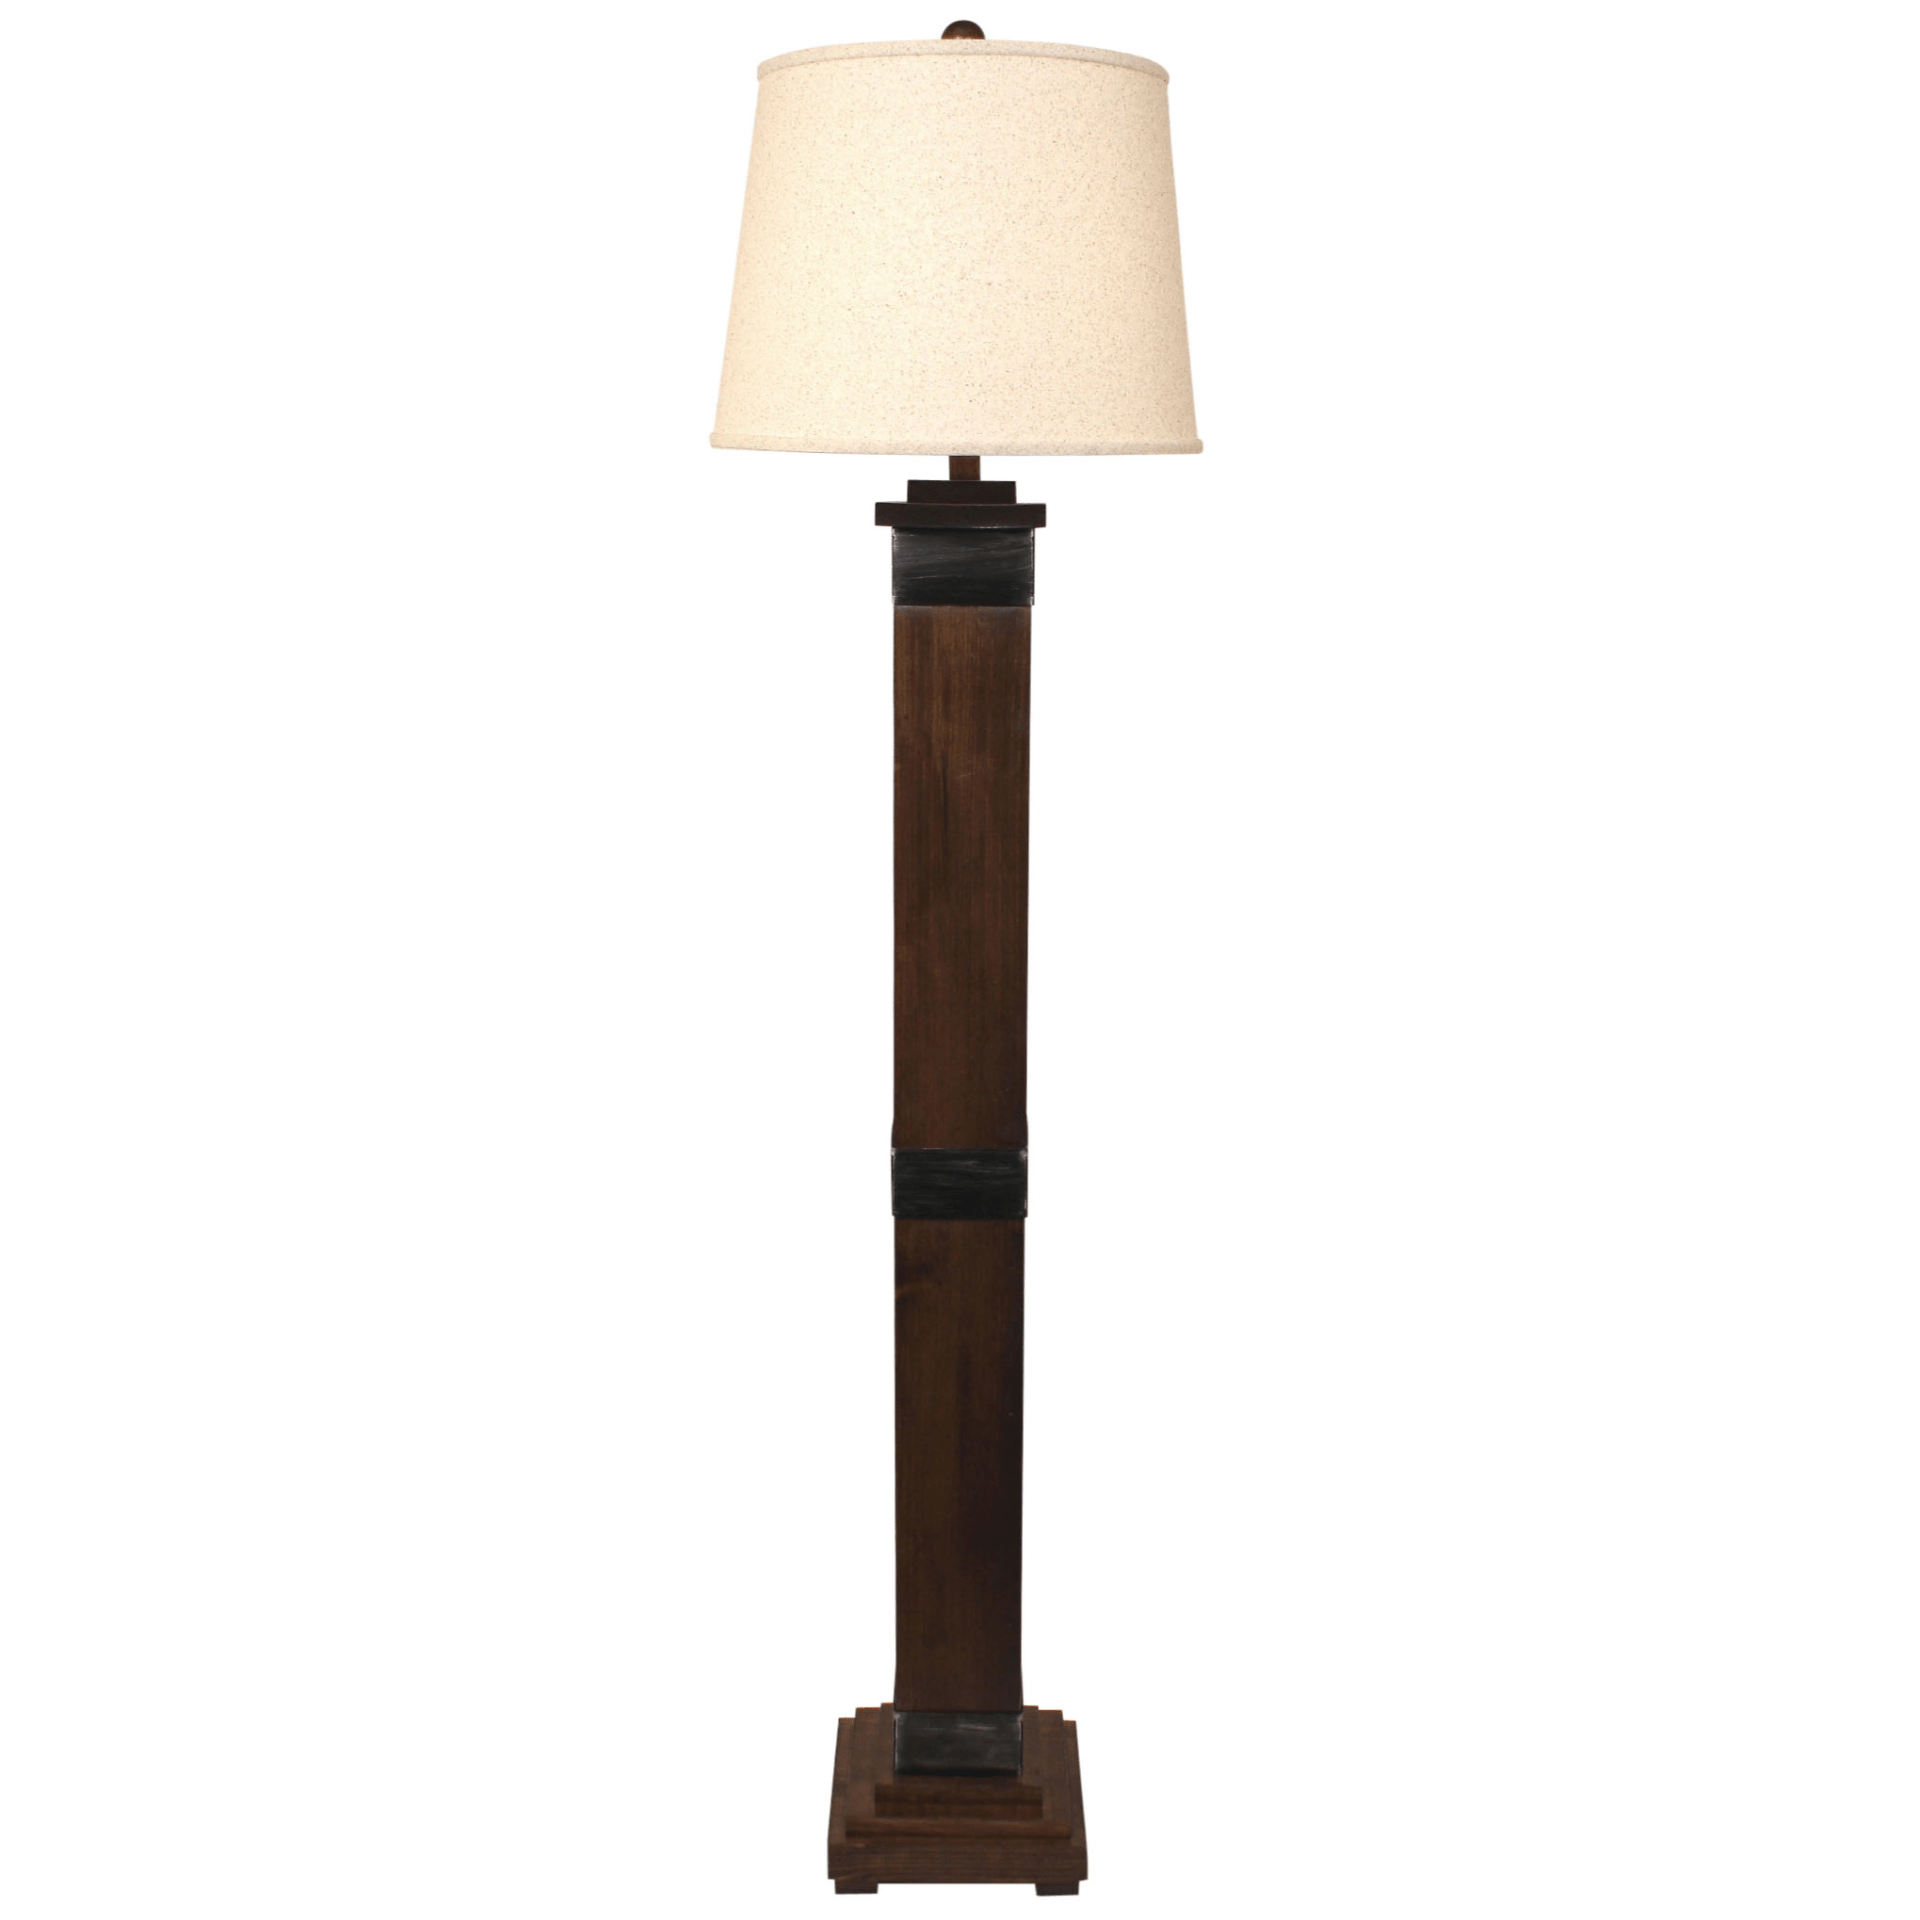 Mission Style Floor Lamp with Steel Accents